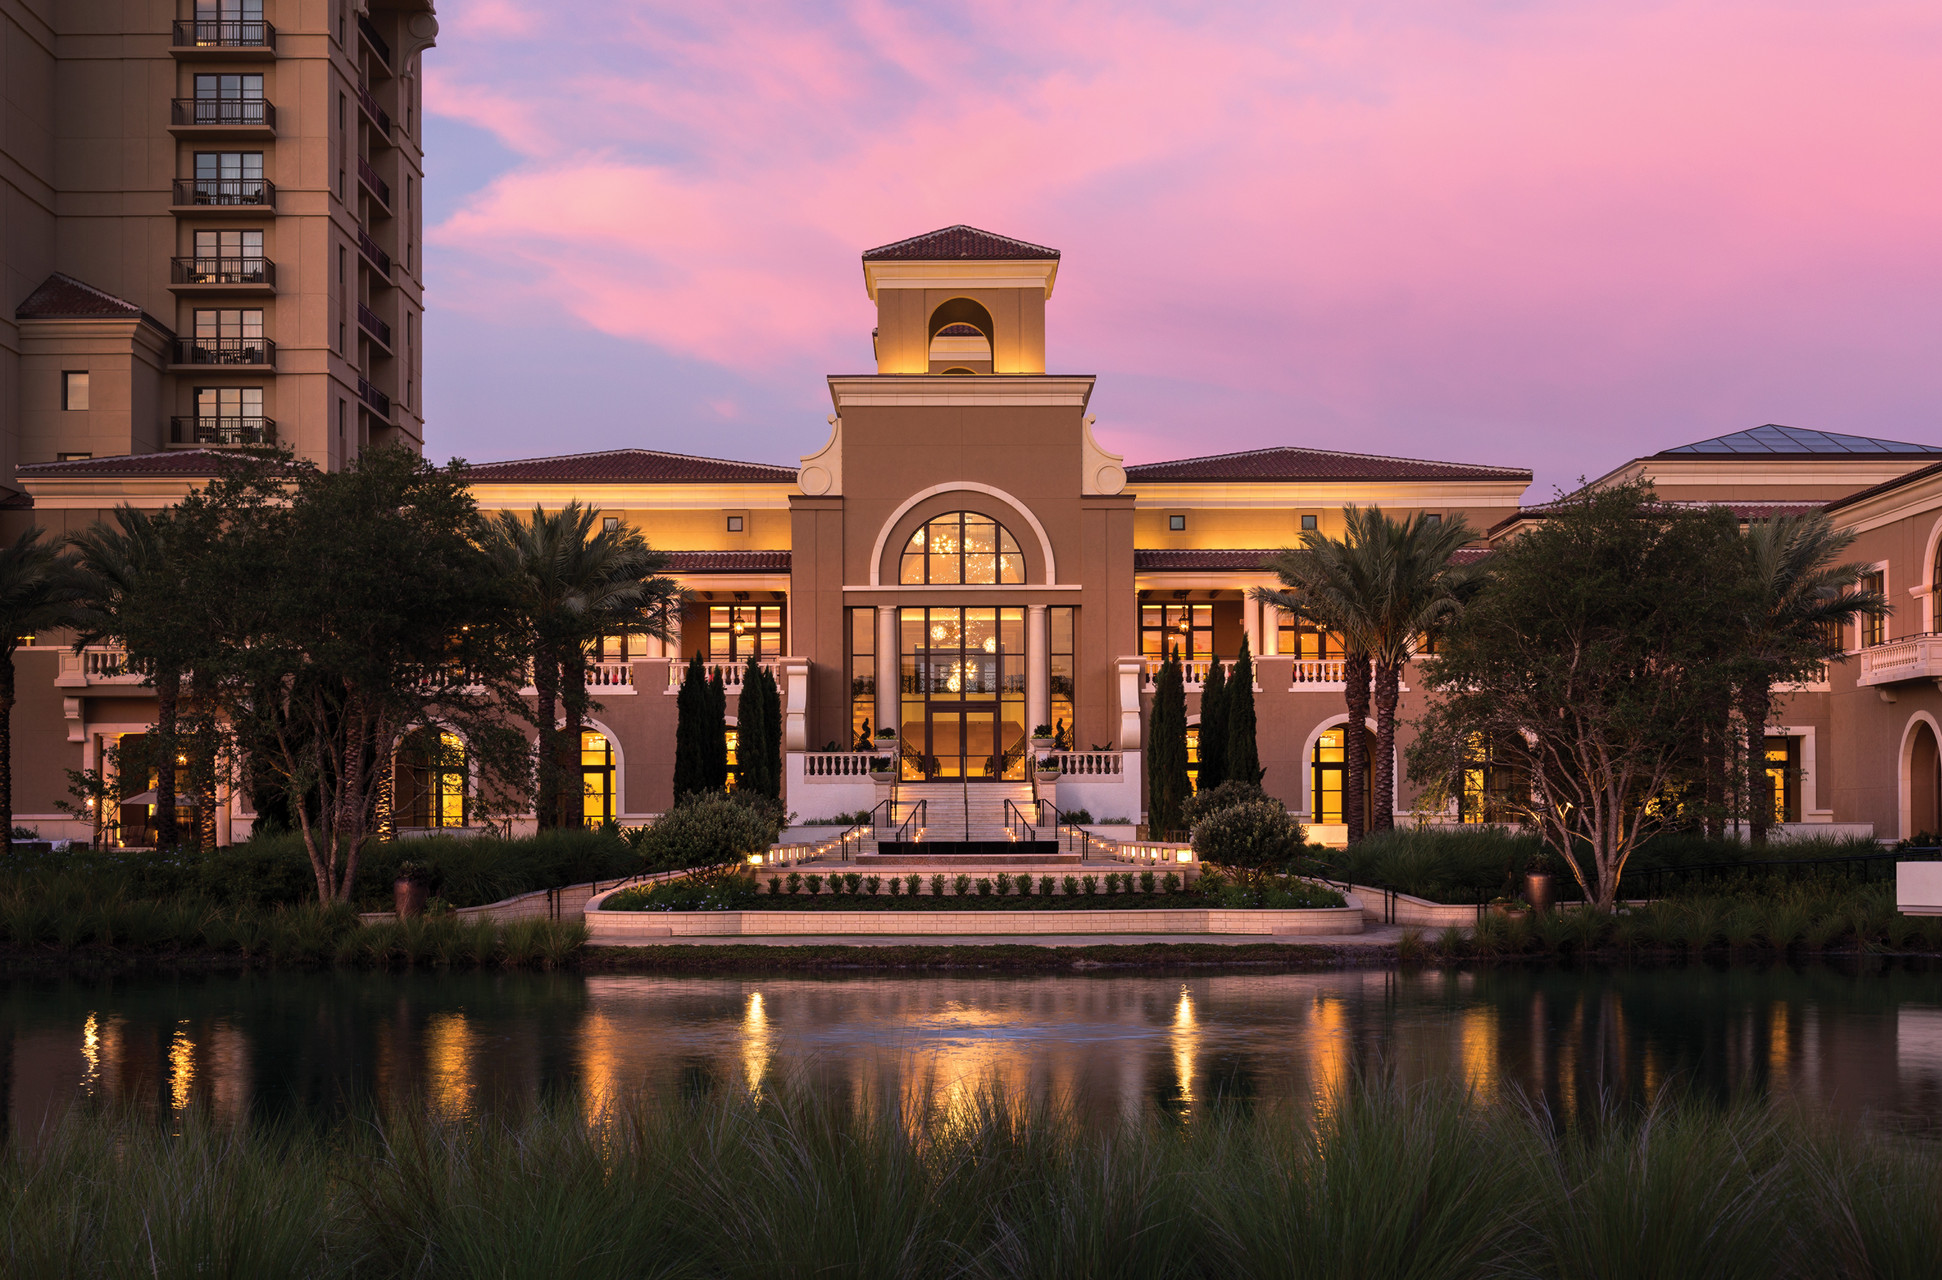 Four Seasons Resort Orlando is known partly for its proximity to Disney World